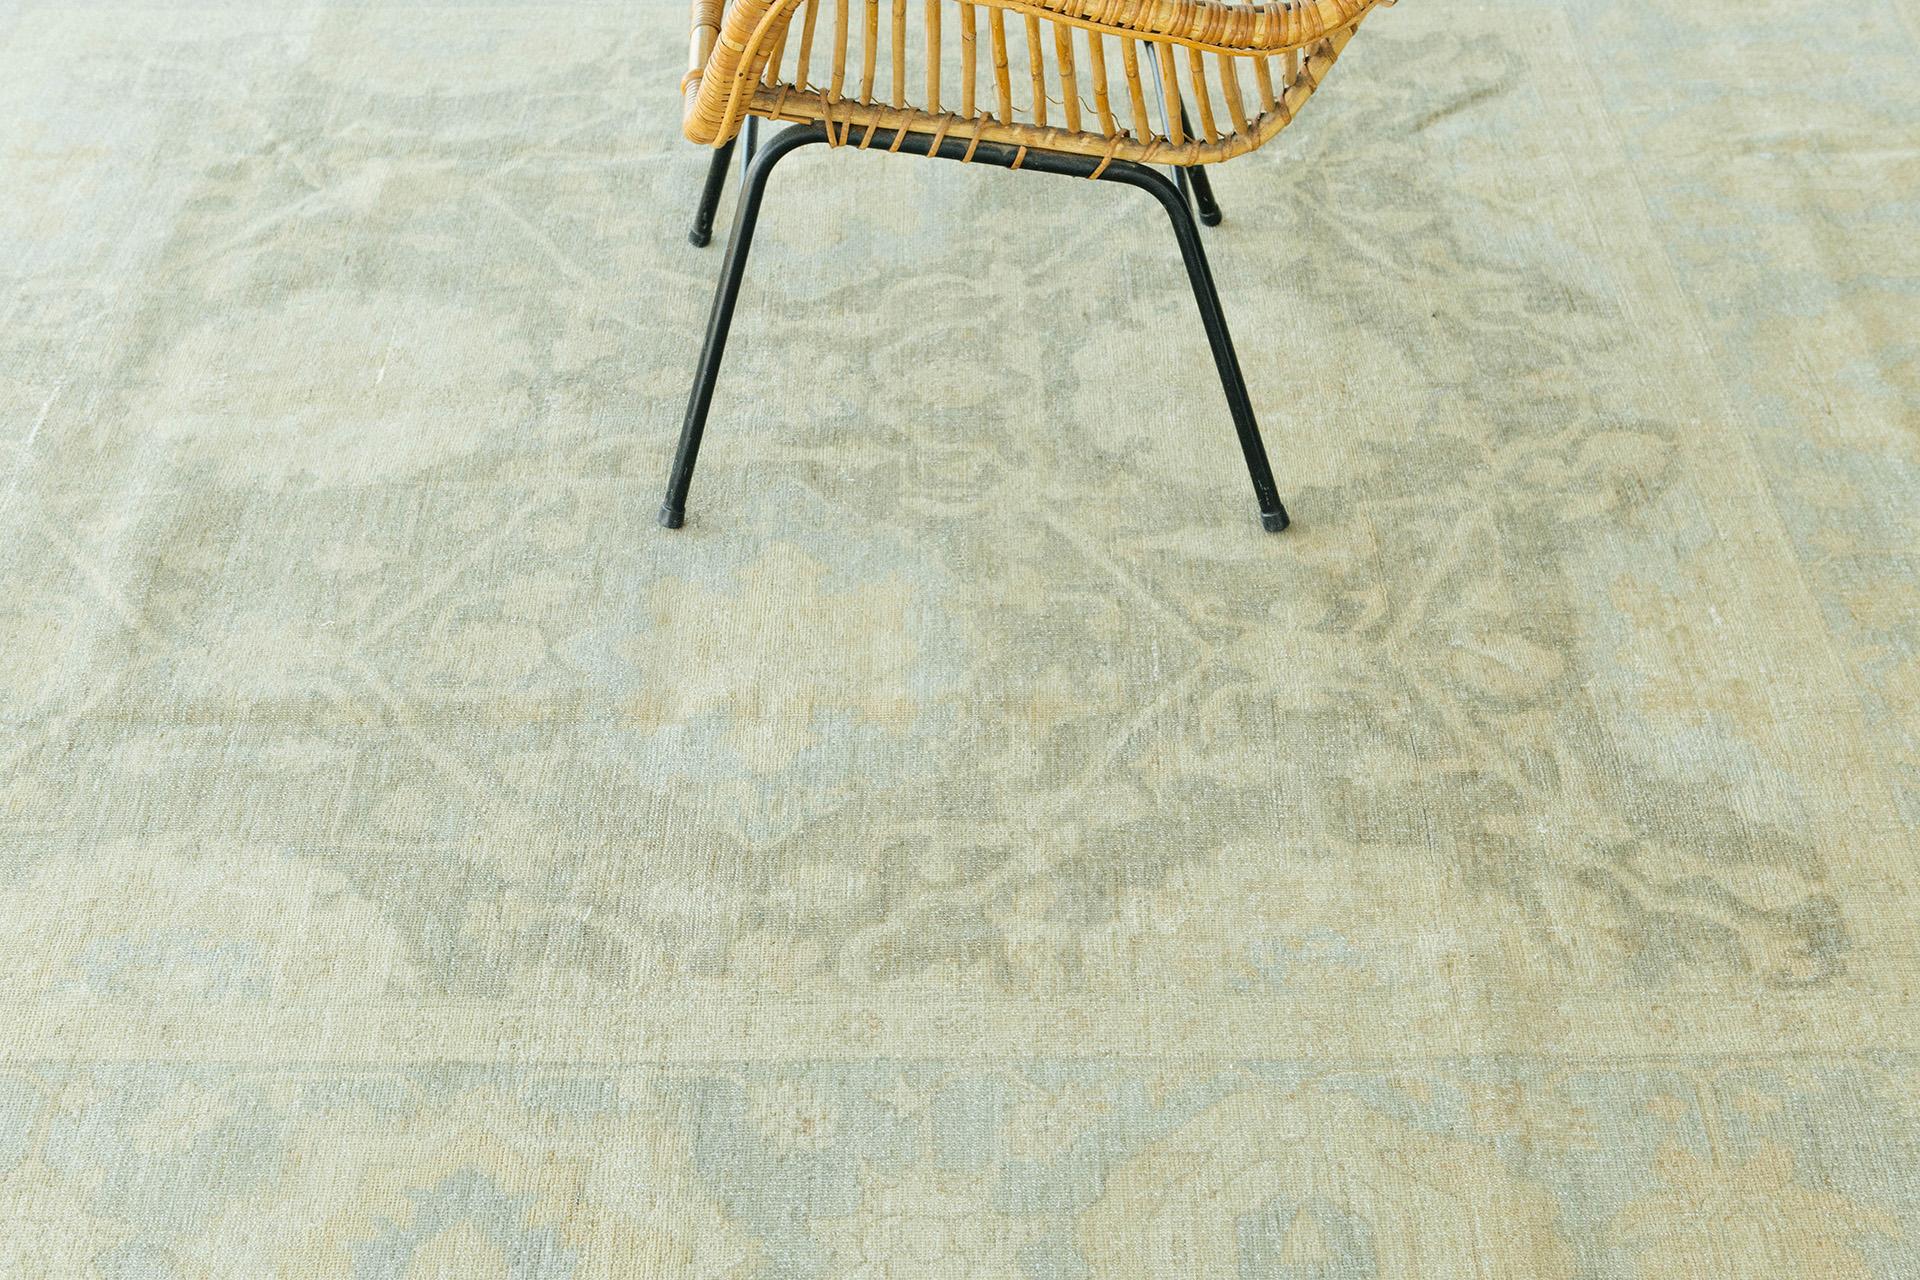 The Mahal rug is a vivid and detailed carpet that veers close to being an ]art form. A beautiful addition to any form, with a distinct aesthetic and approach among the different types of space. For homeowners, beige is a neutral, quiet, and pleasant